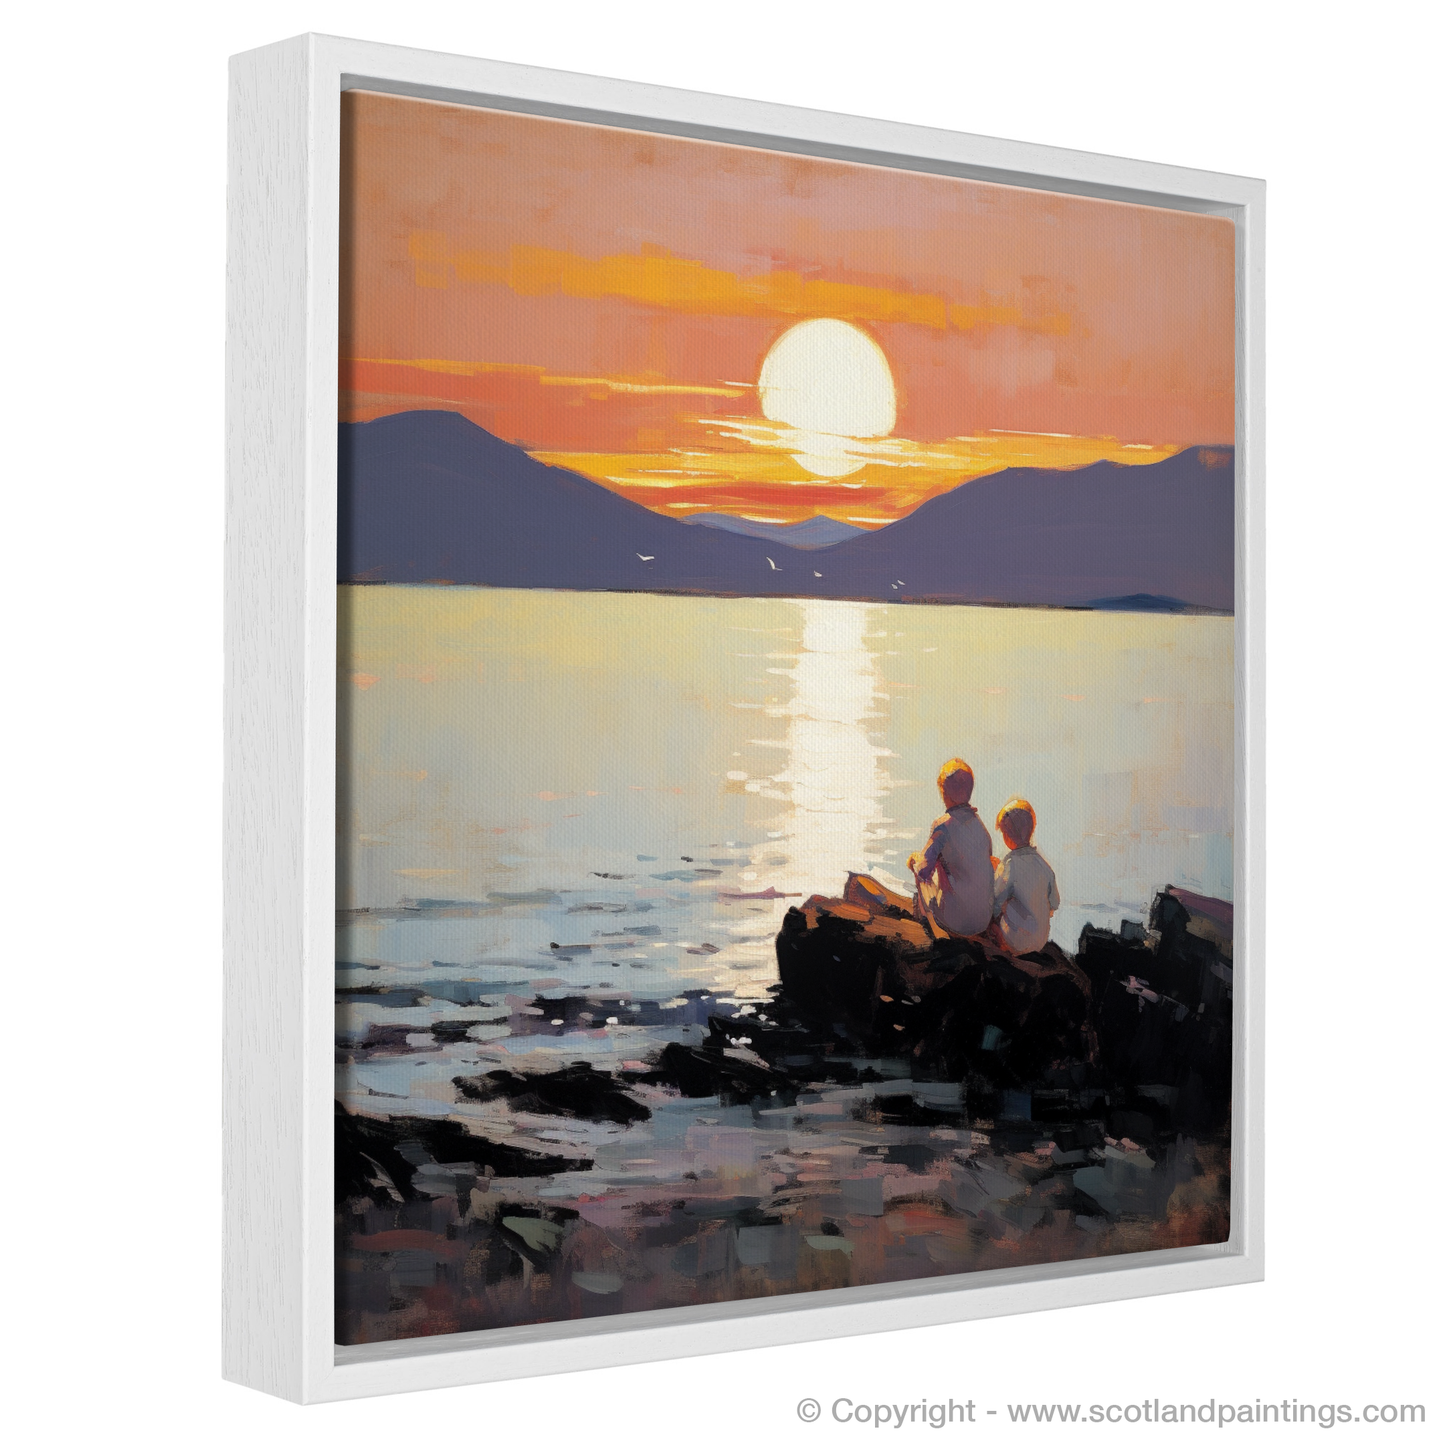 Painting and Art Print of Young explorers watching the sunset over the Isle of Arran from the peaceful Saltcoats Beach entitled "Sunset Serenity on Saltcoats Beach".